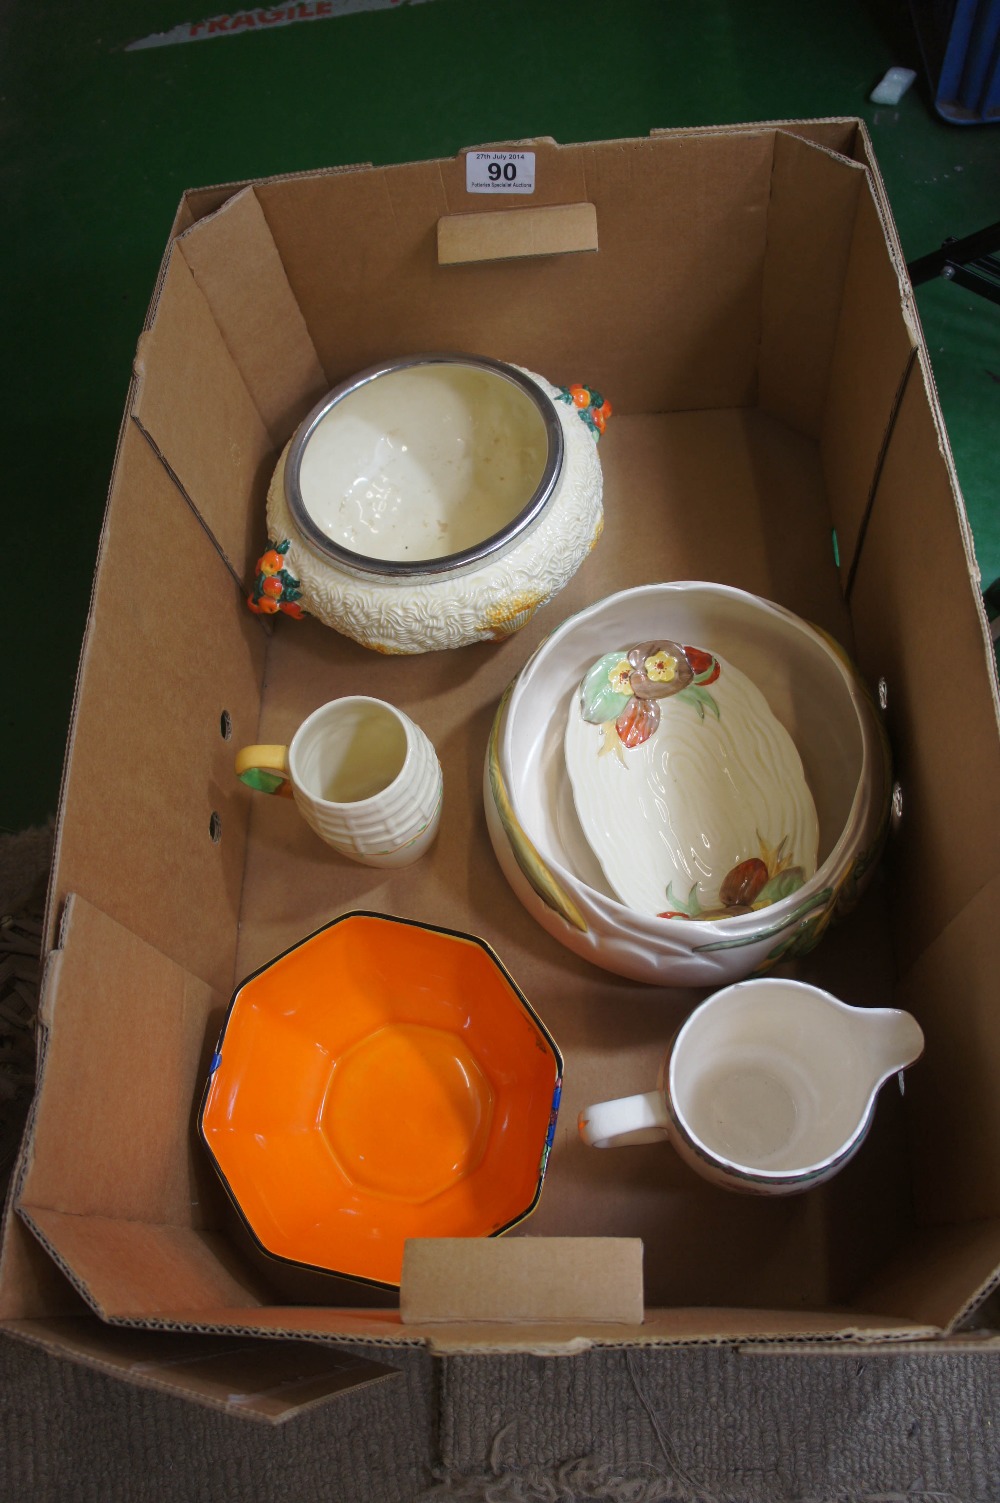 A collection of Clarice Cliff pottery to include Newport Pottery Bowl with embossed floral